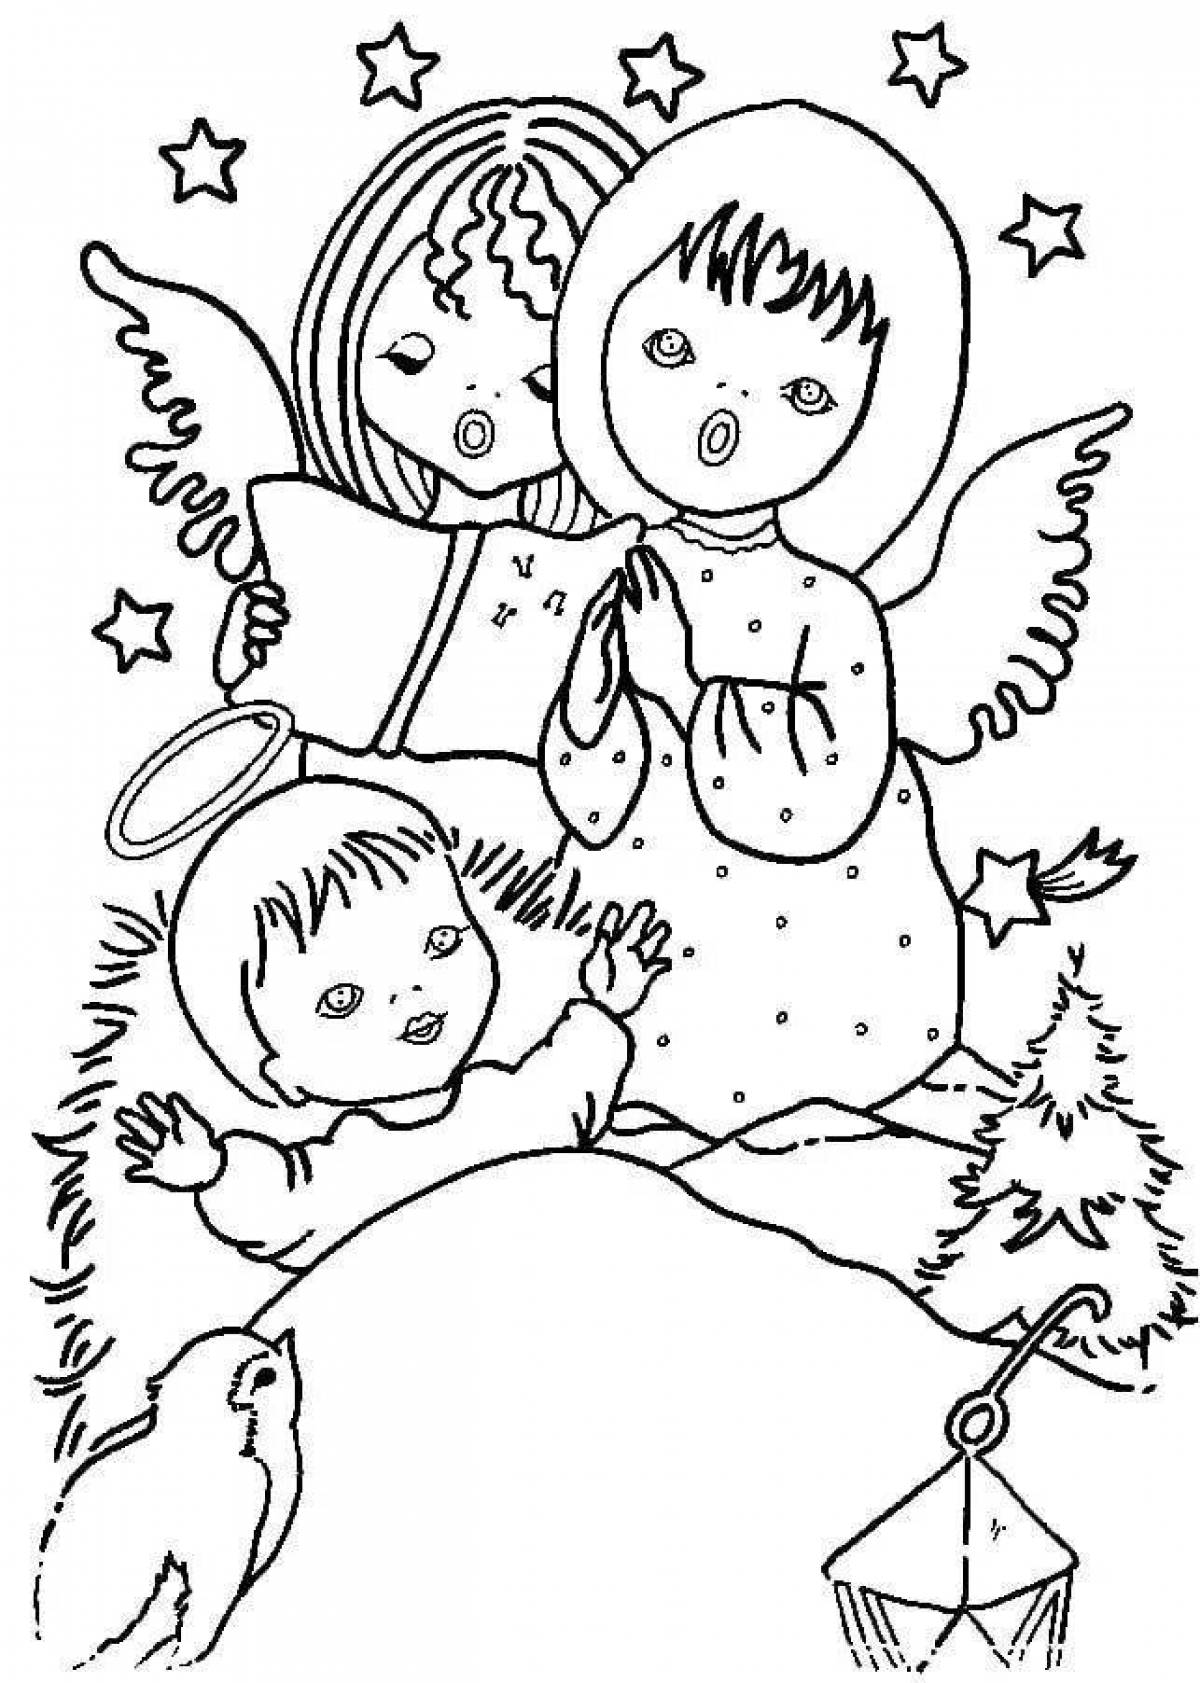 Animated Christmas coloring book for kids 6-7 years old